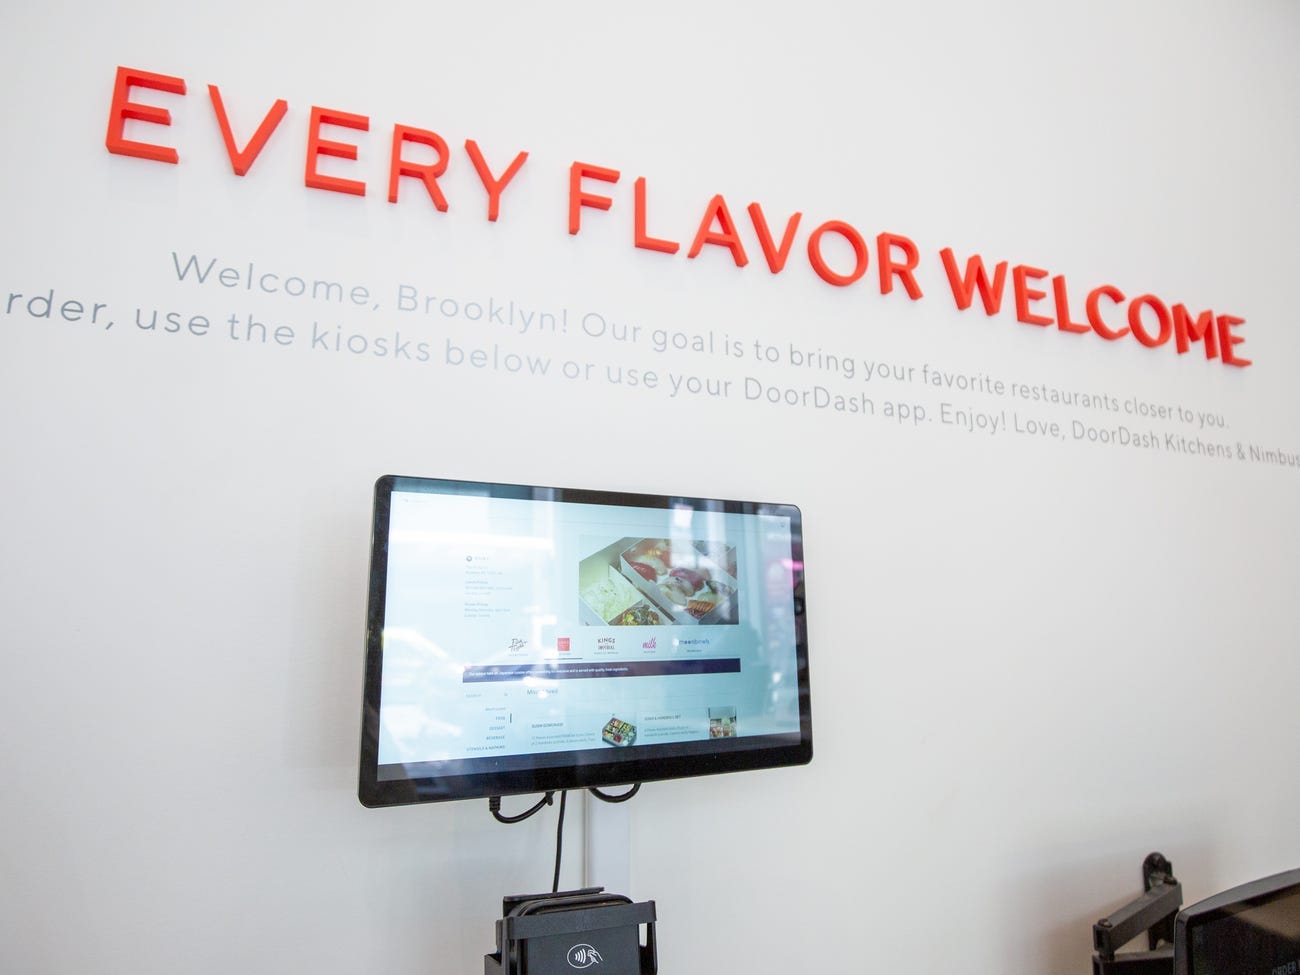 A wall-mounted touch screen with a card payment pad underneath. Red text on the wall reads "every flavor welcome."